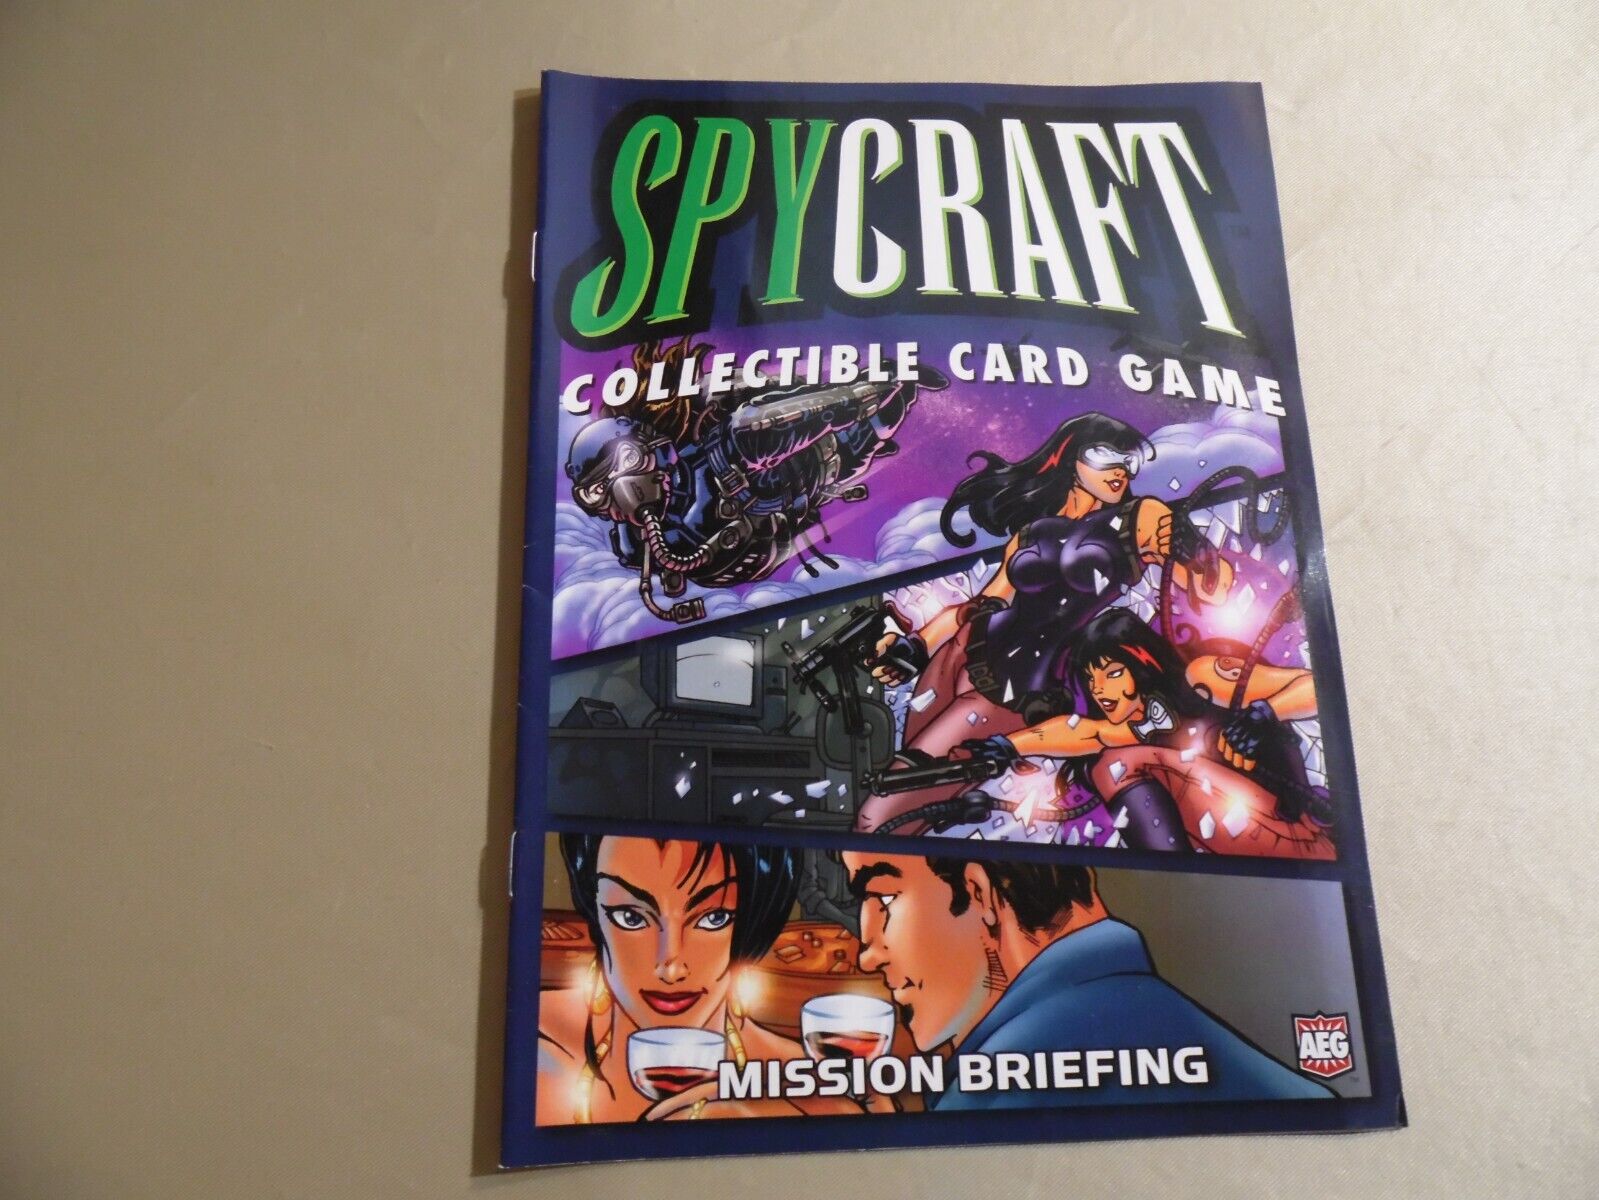 Spycraft Collectible Card Game Mission Briefing / AEG Entertainment 2004